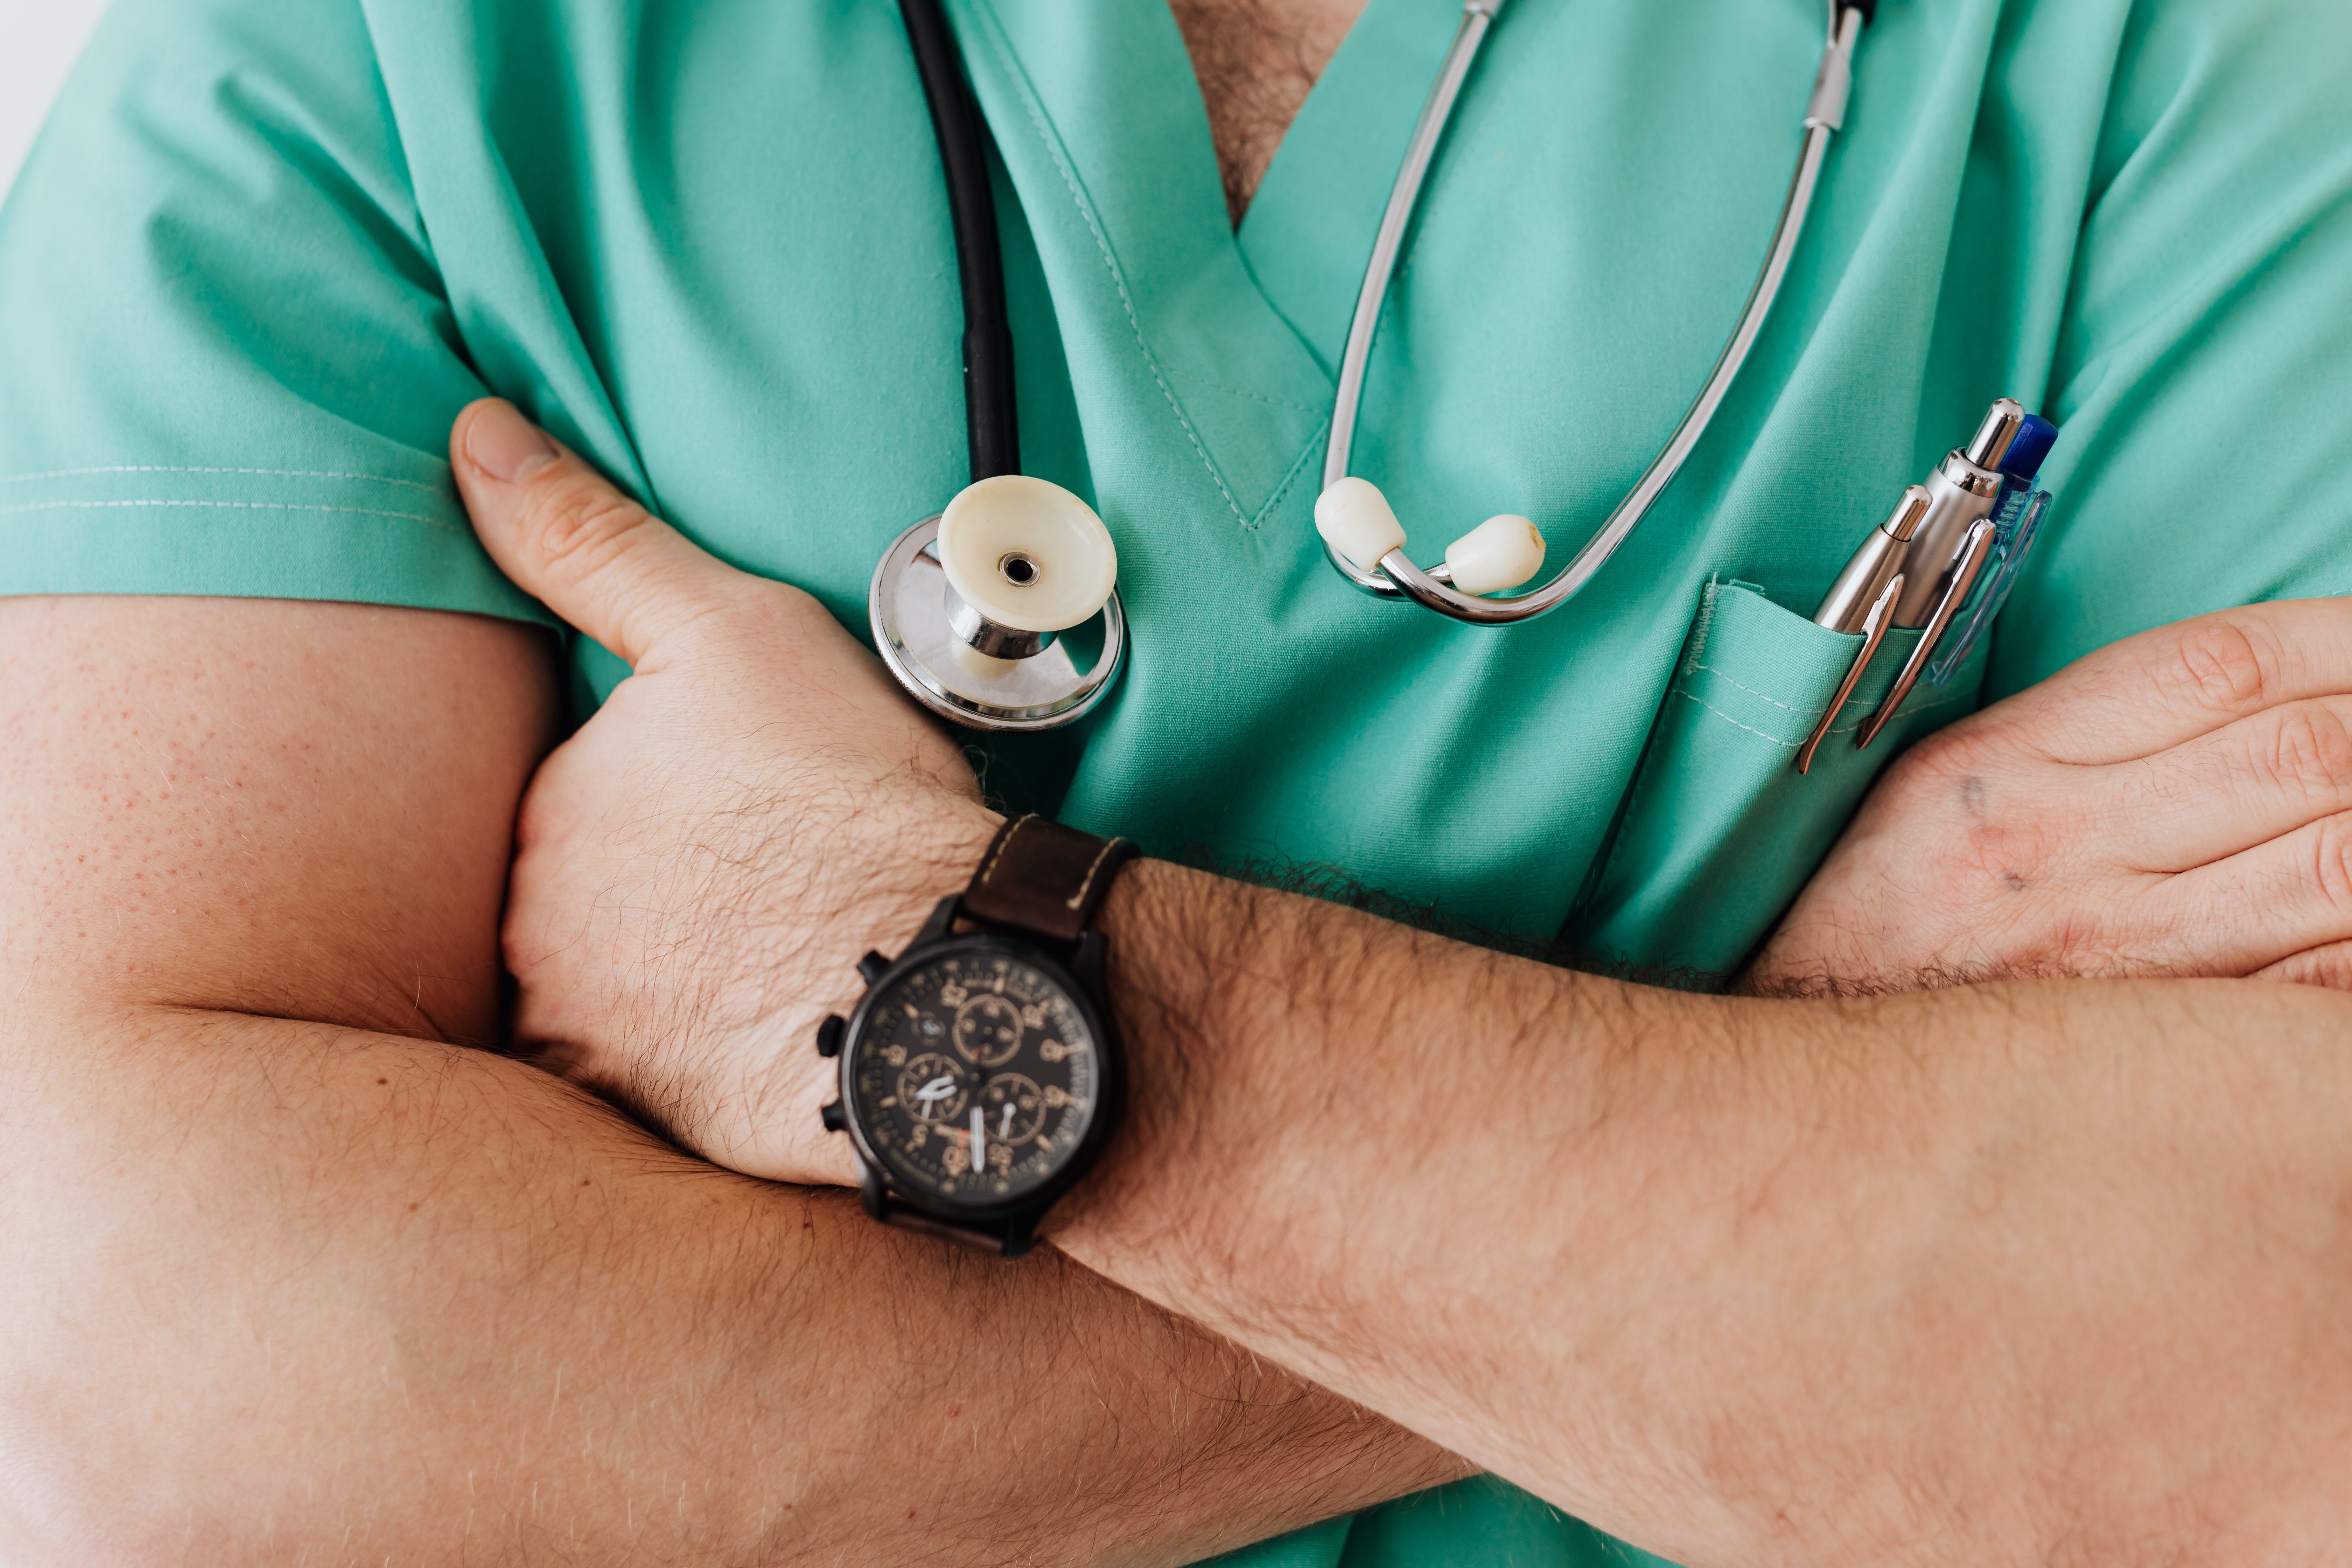 Close up photo of person in green scrubs with arms crossed Photo by Karolina Grabowska from Pexels